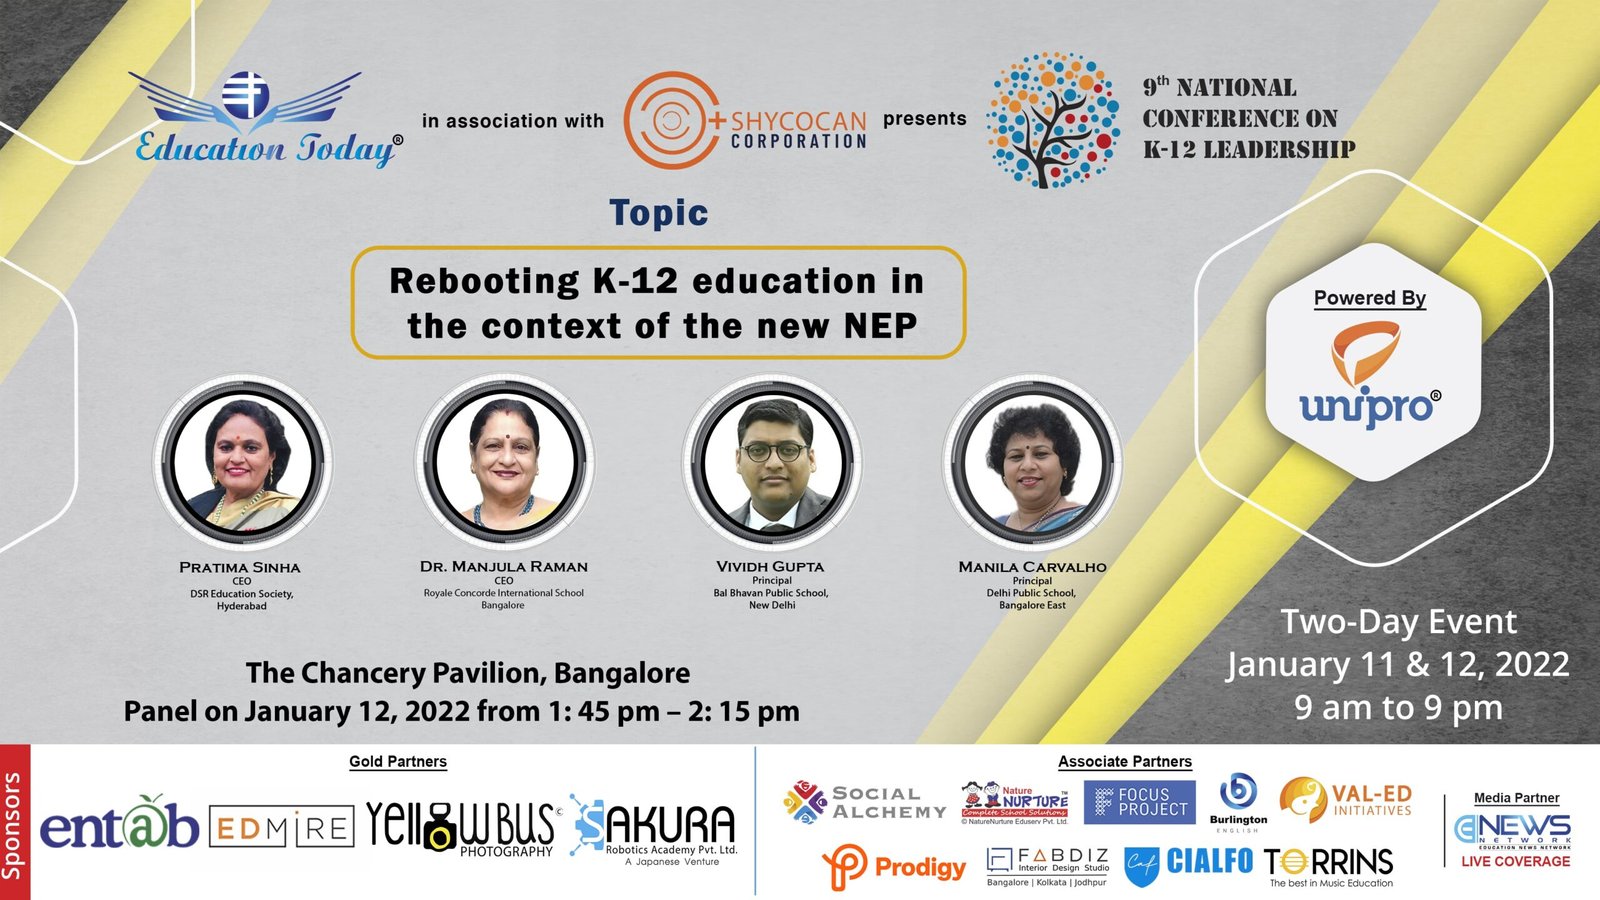 Panel 5-Rebooting K-12 education in the context of the new NEP